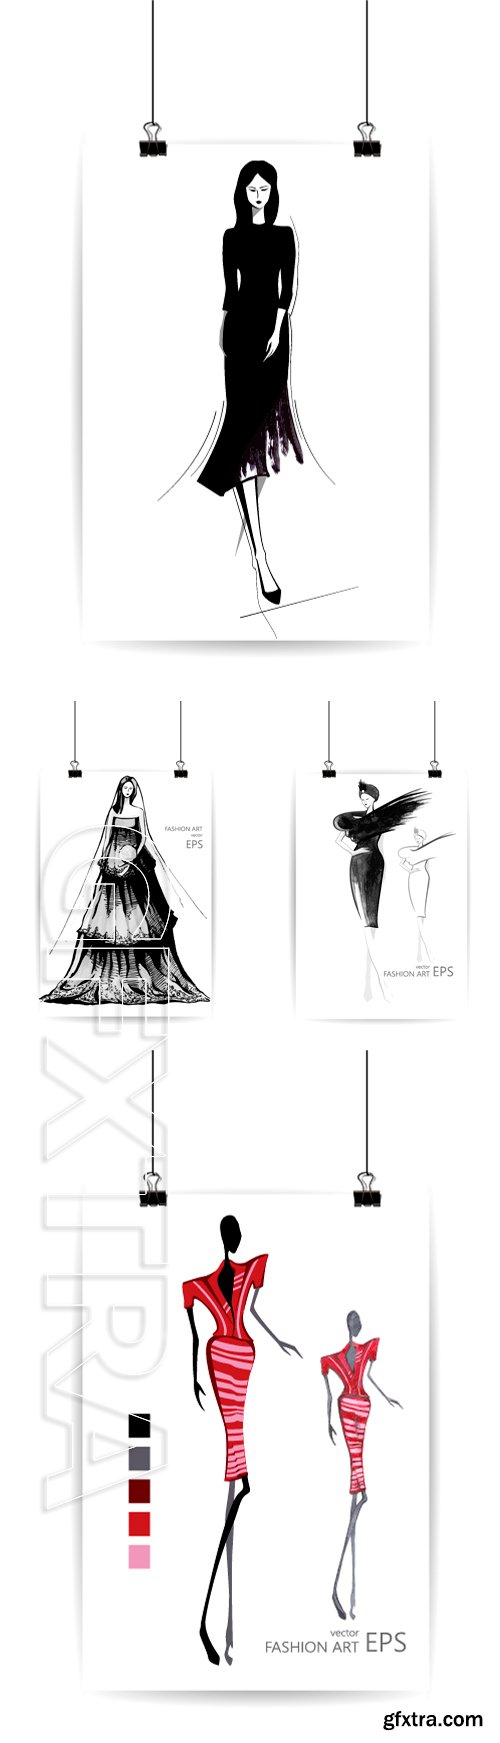 Stock Vectors - Beautiful fashion women in sketch style. Vector illustration